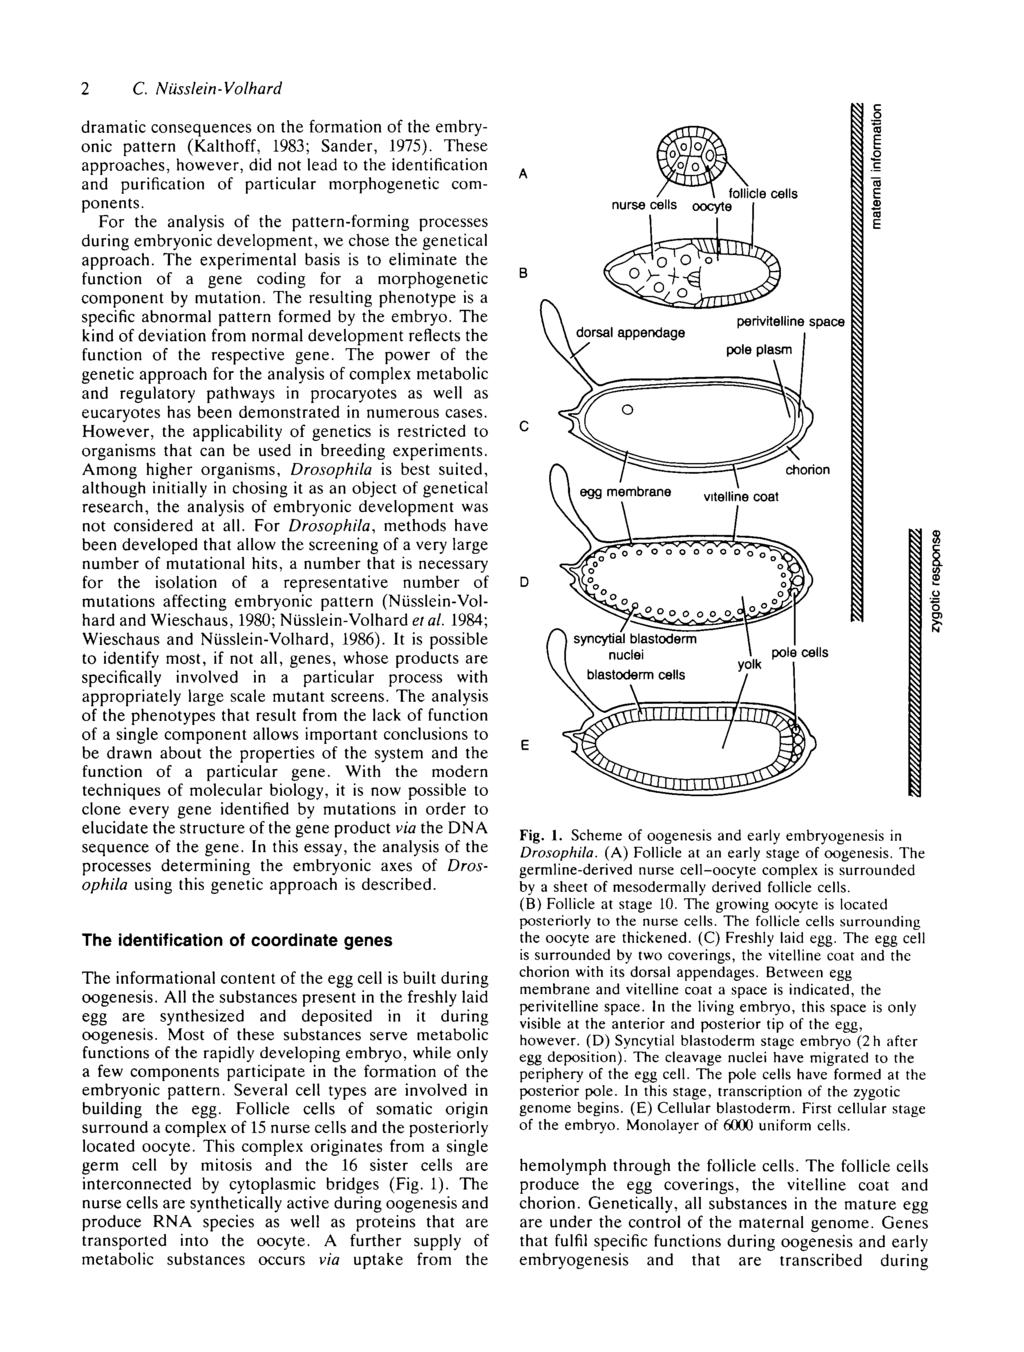 2 C. Niissleirt-Volhard dramatic consequences on the formation of the embryonic pattern (Kalthoff, 1983; Sander, 1975).